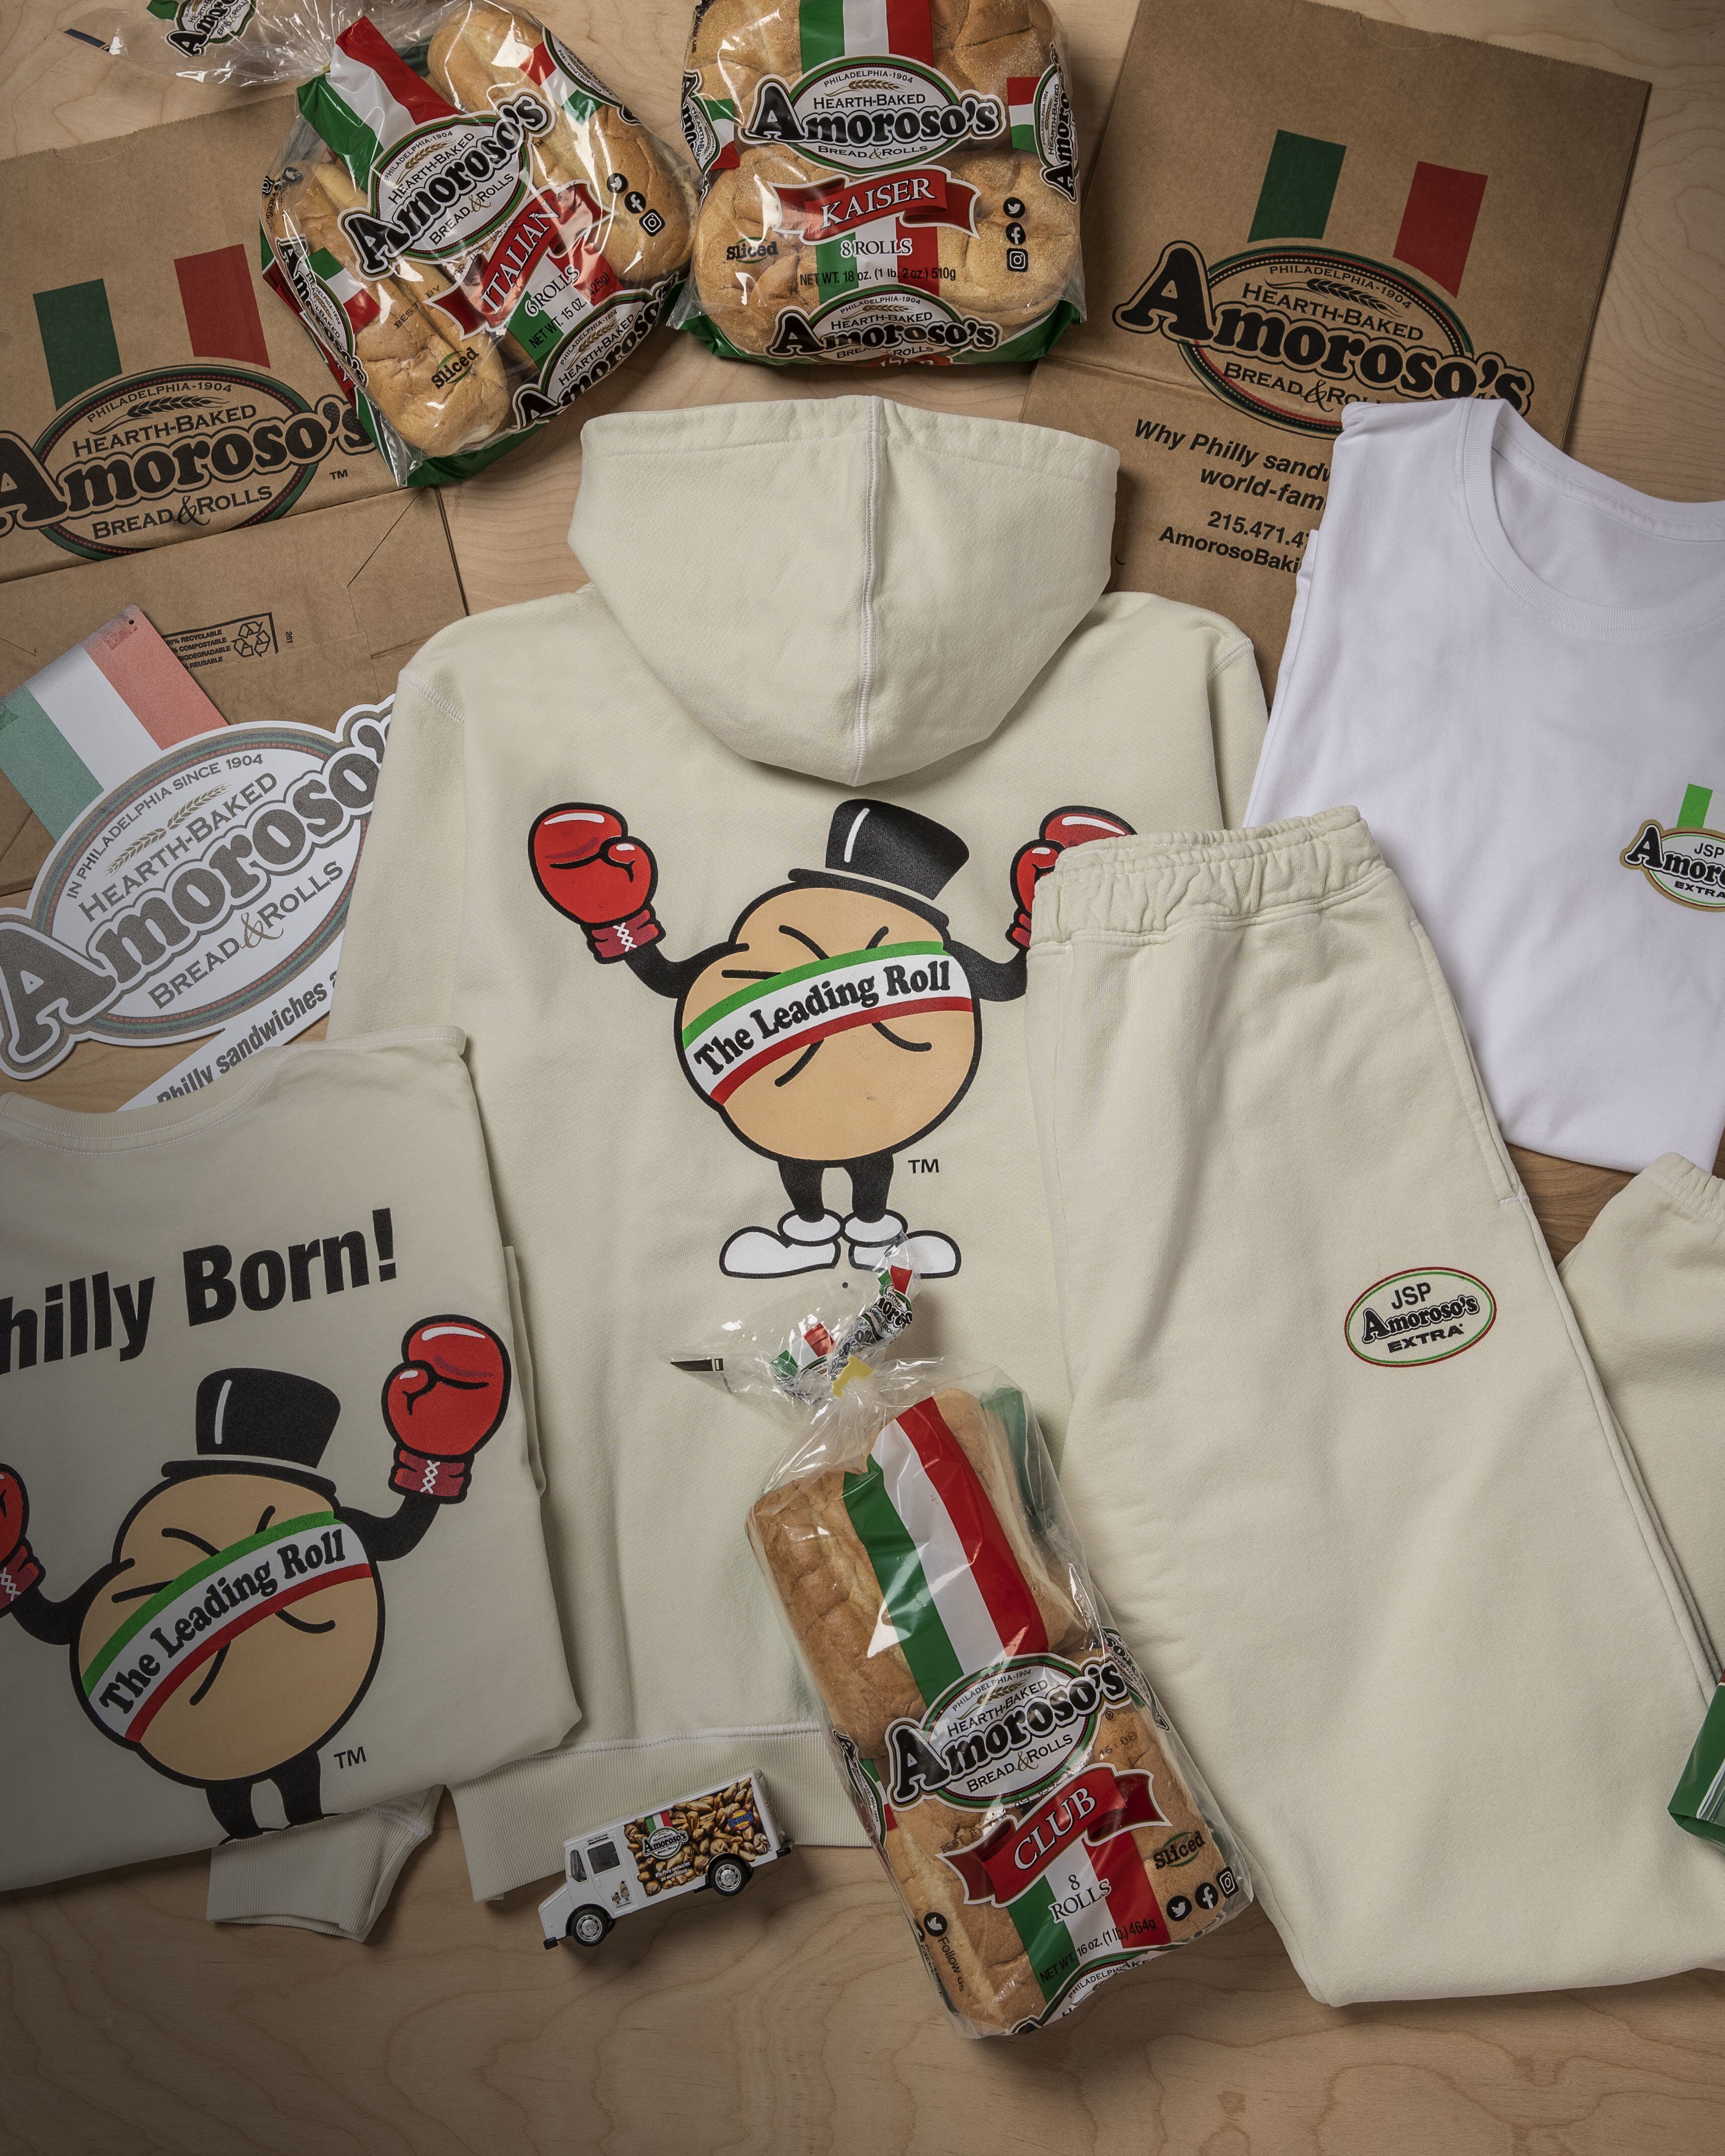 Amoroso's rolls out a streetwear line with Jimmy Sweatpants, a former  Philly skateboarder